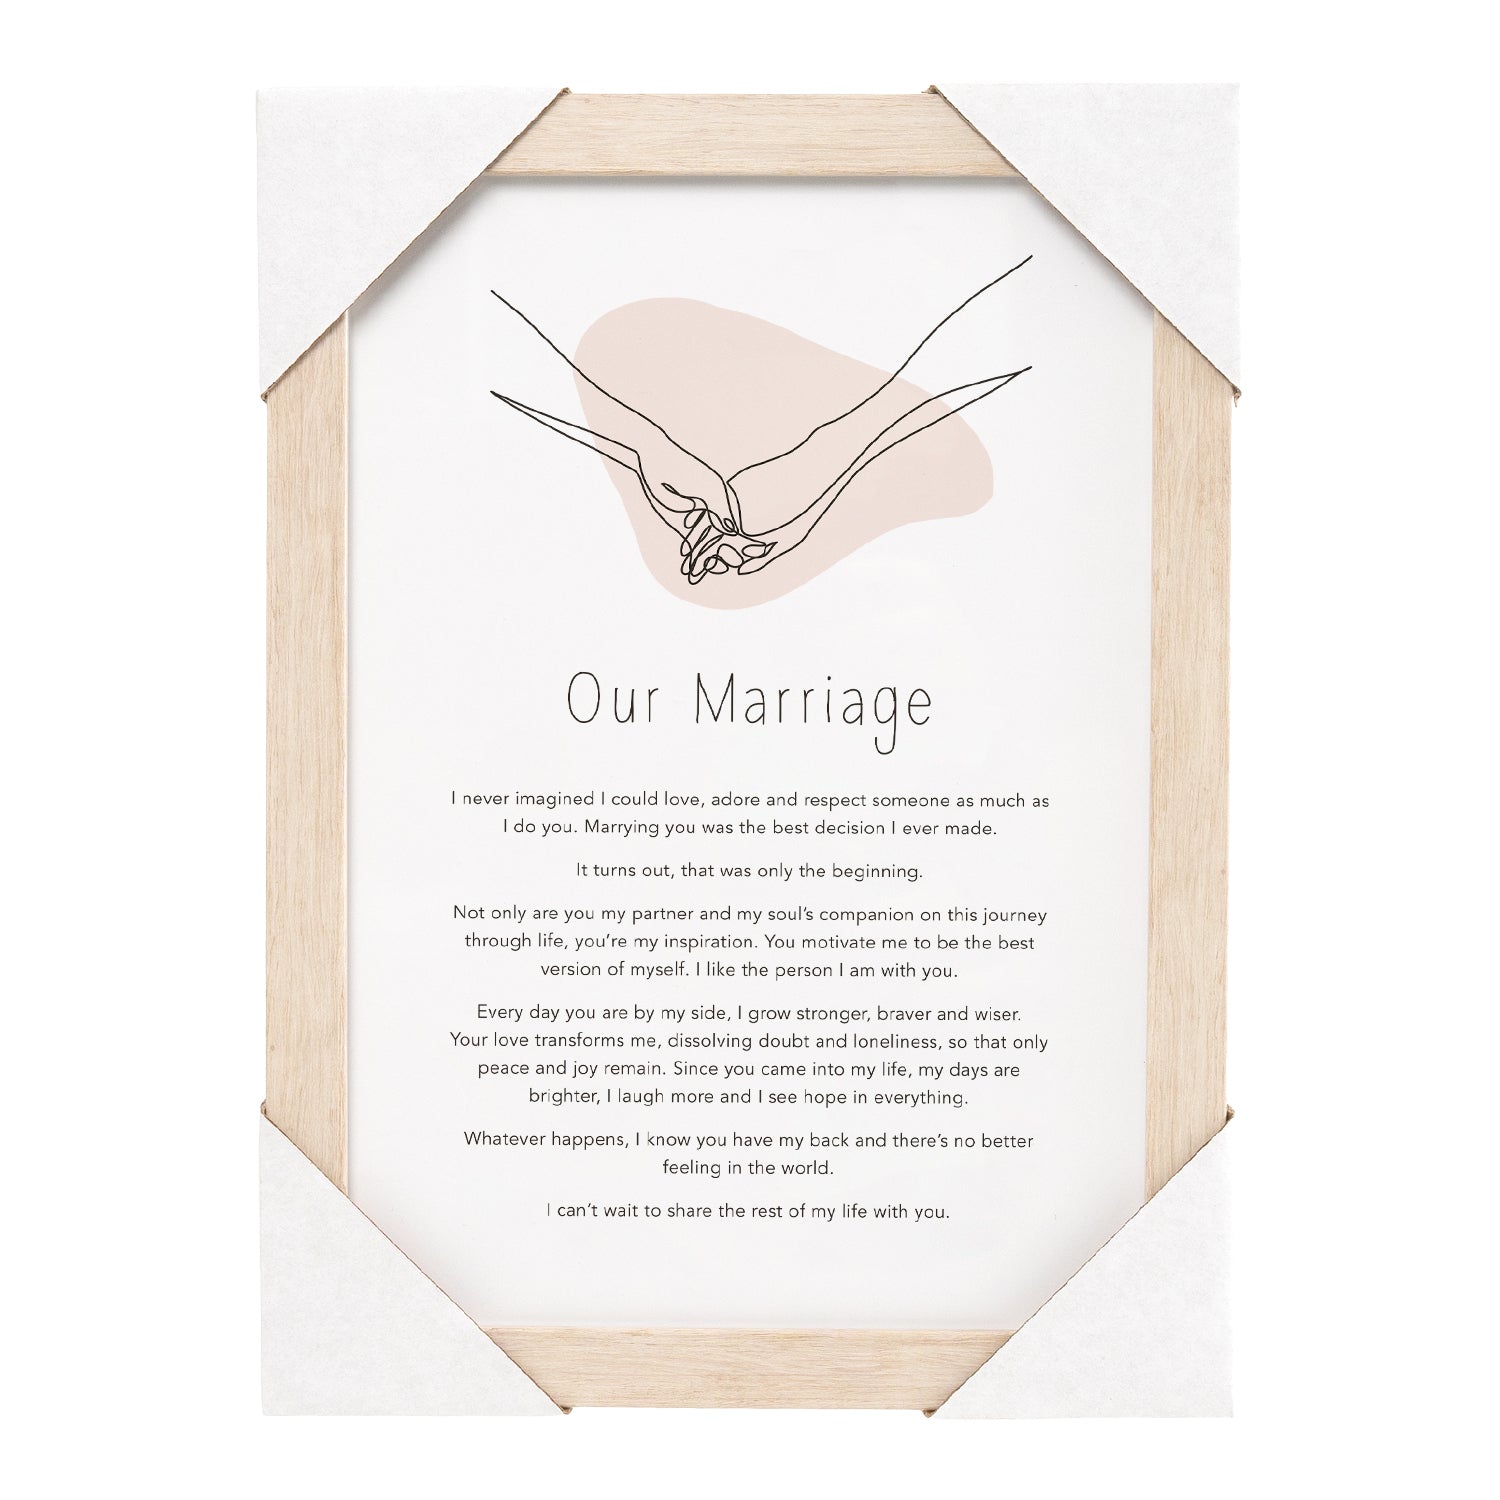 GIFT OF WORDS WOODEN FRAME "OUR MARRIGE"